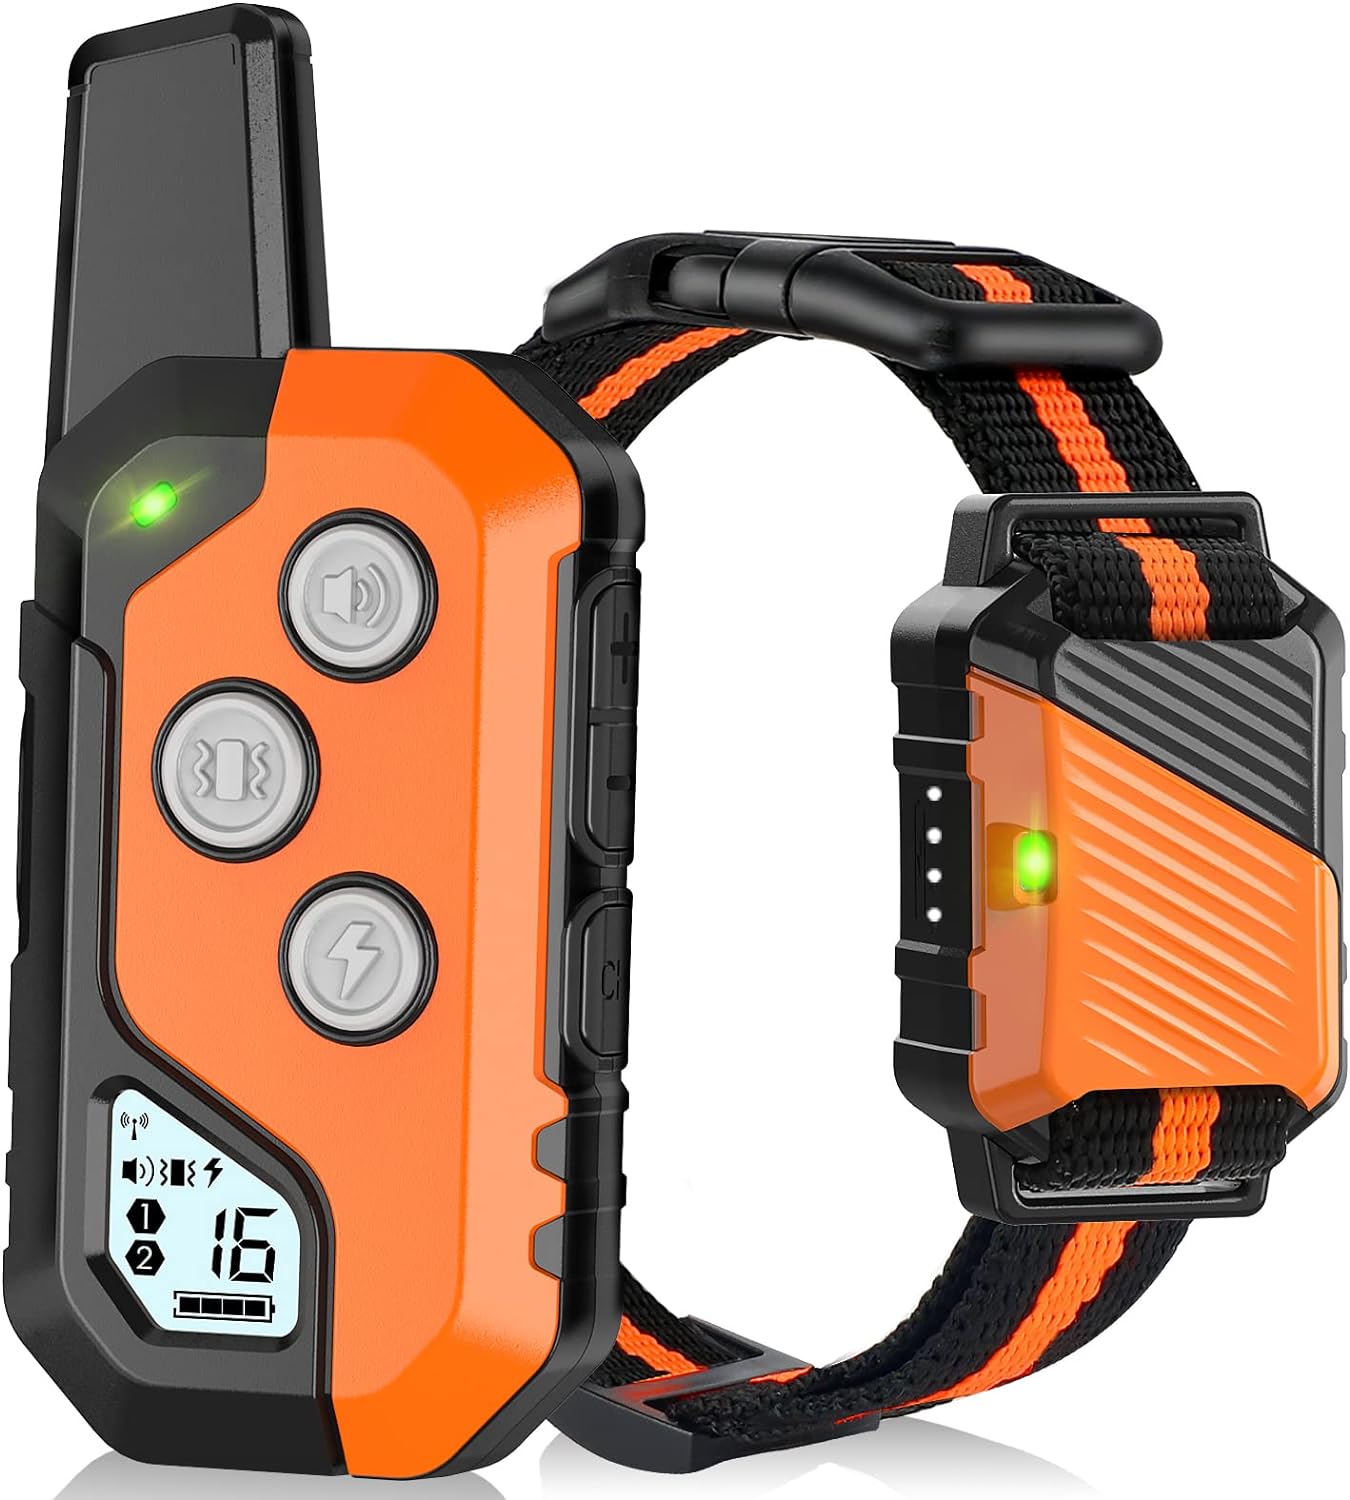 PIOUNS Dog Shock Collar, IP67 Waterproof Dog Training Collar with Remote, 3 Training Modes, Shock, Vibration and Beep, Rechargeable Electric Shock Collar for Large Medium Small Dog